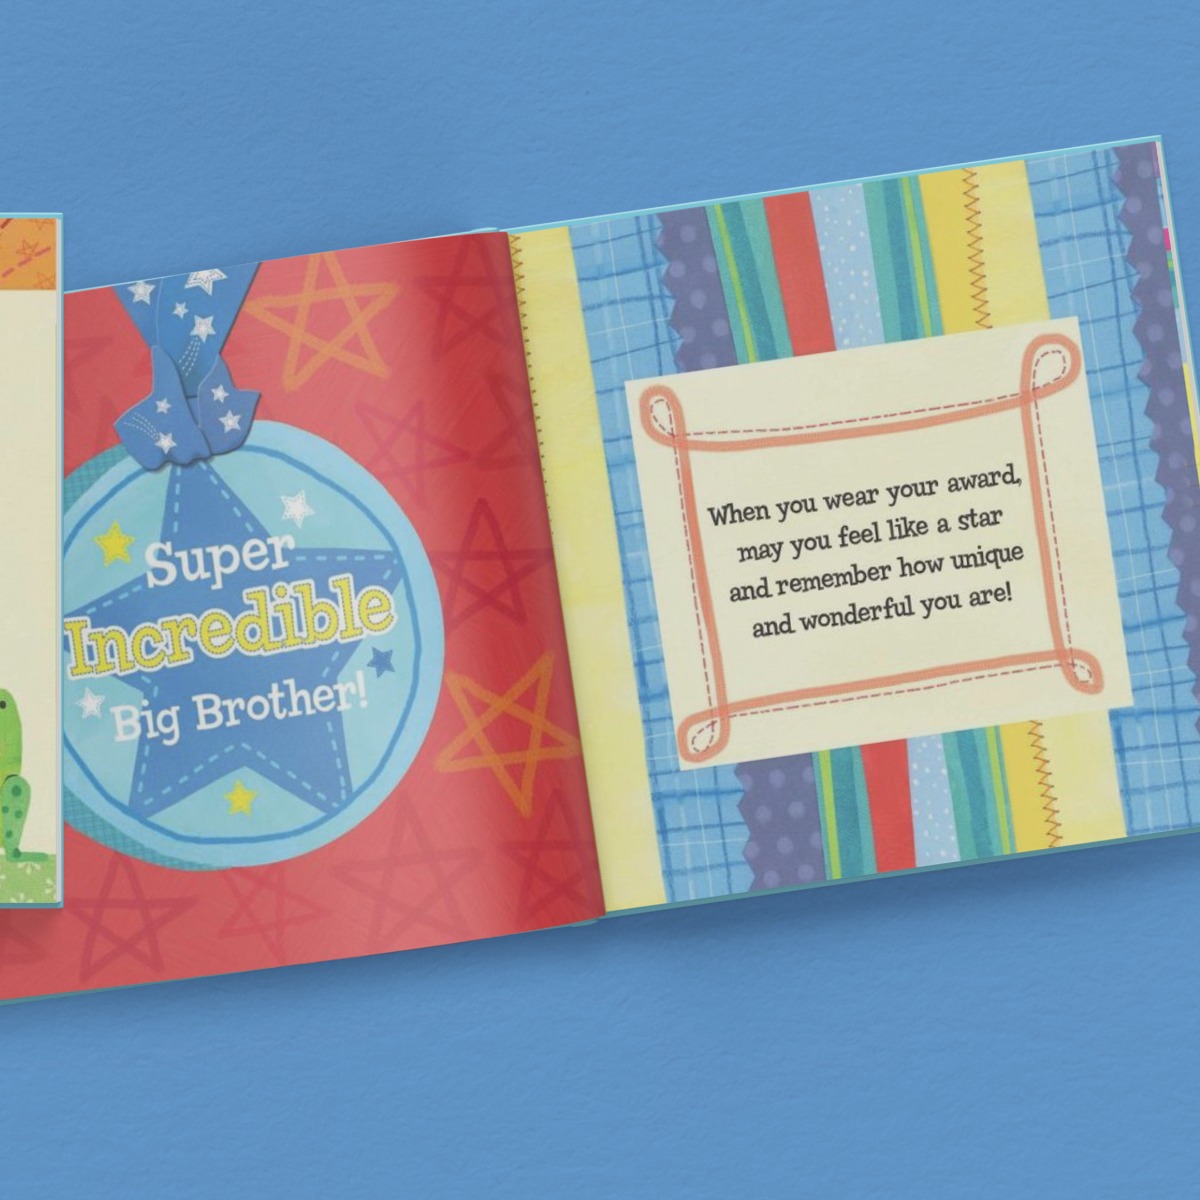 The Super, Incredible Big Brother Personalised Book and Medal